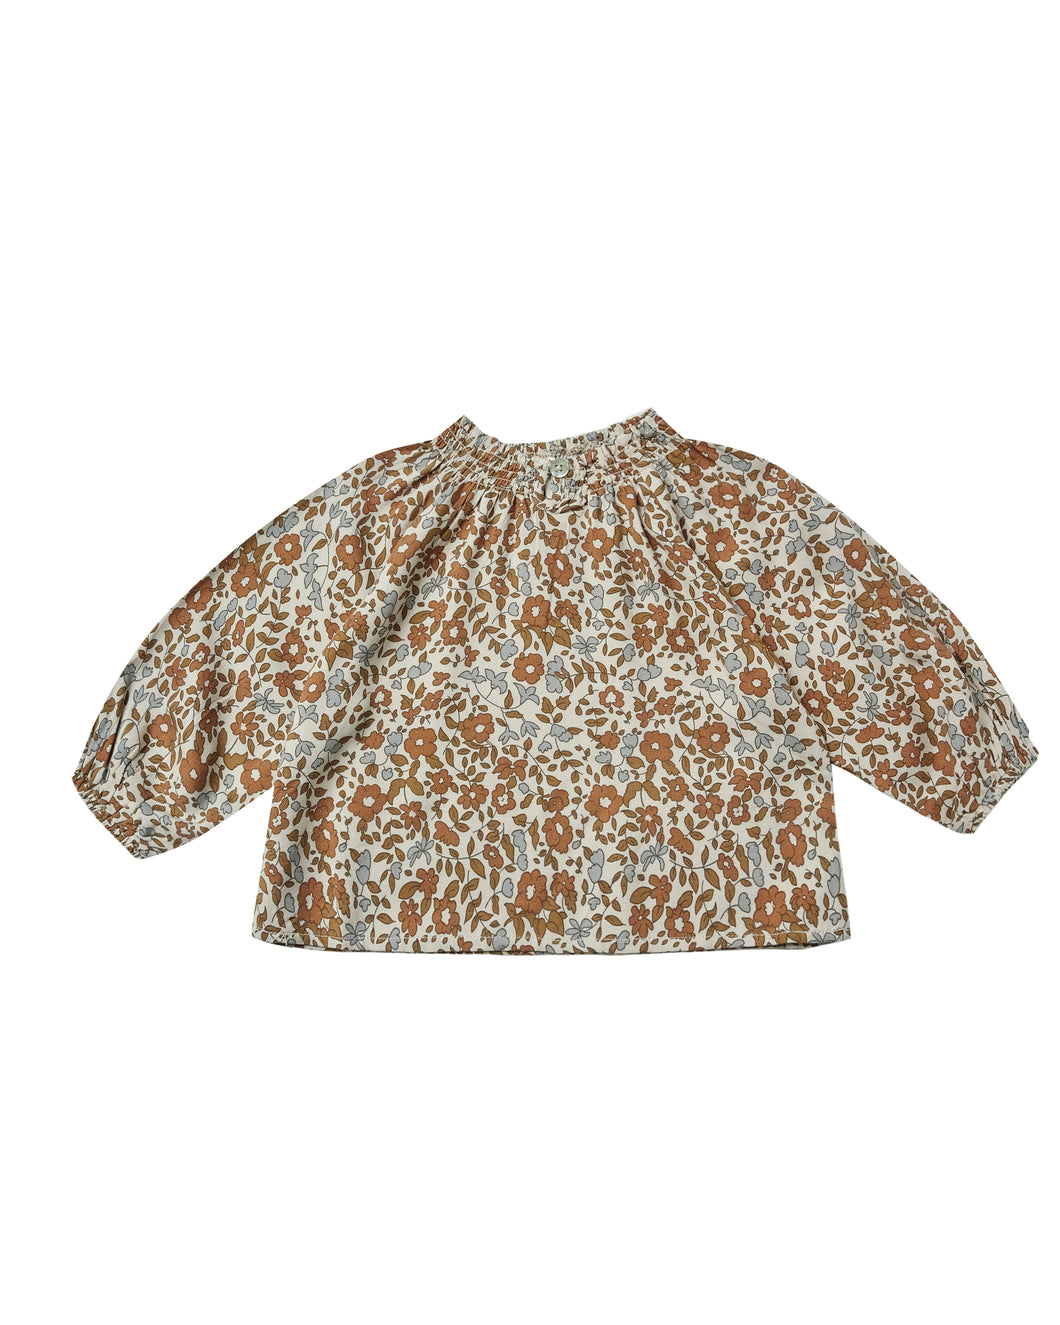 Quincy blouse - bloom